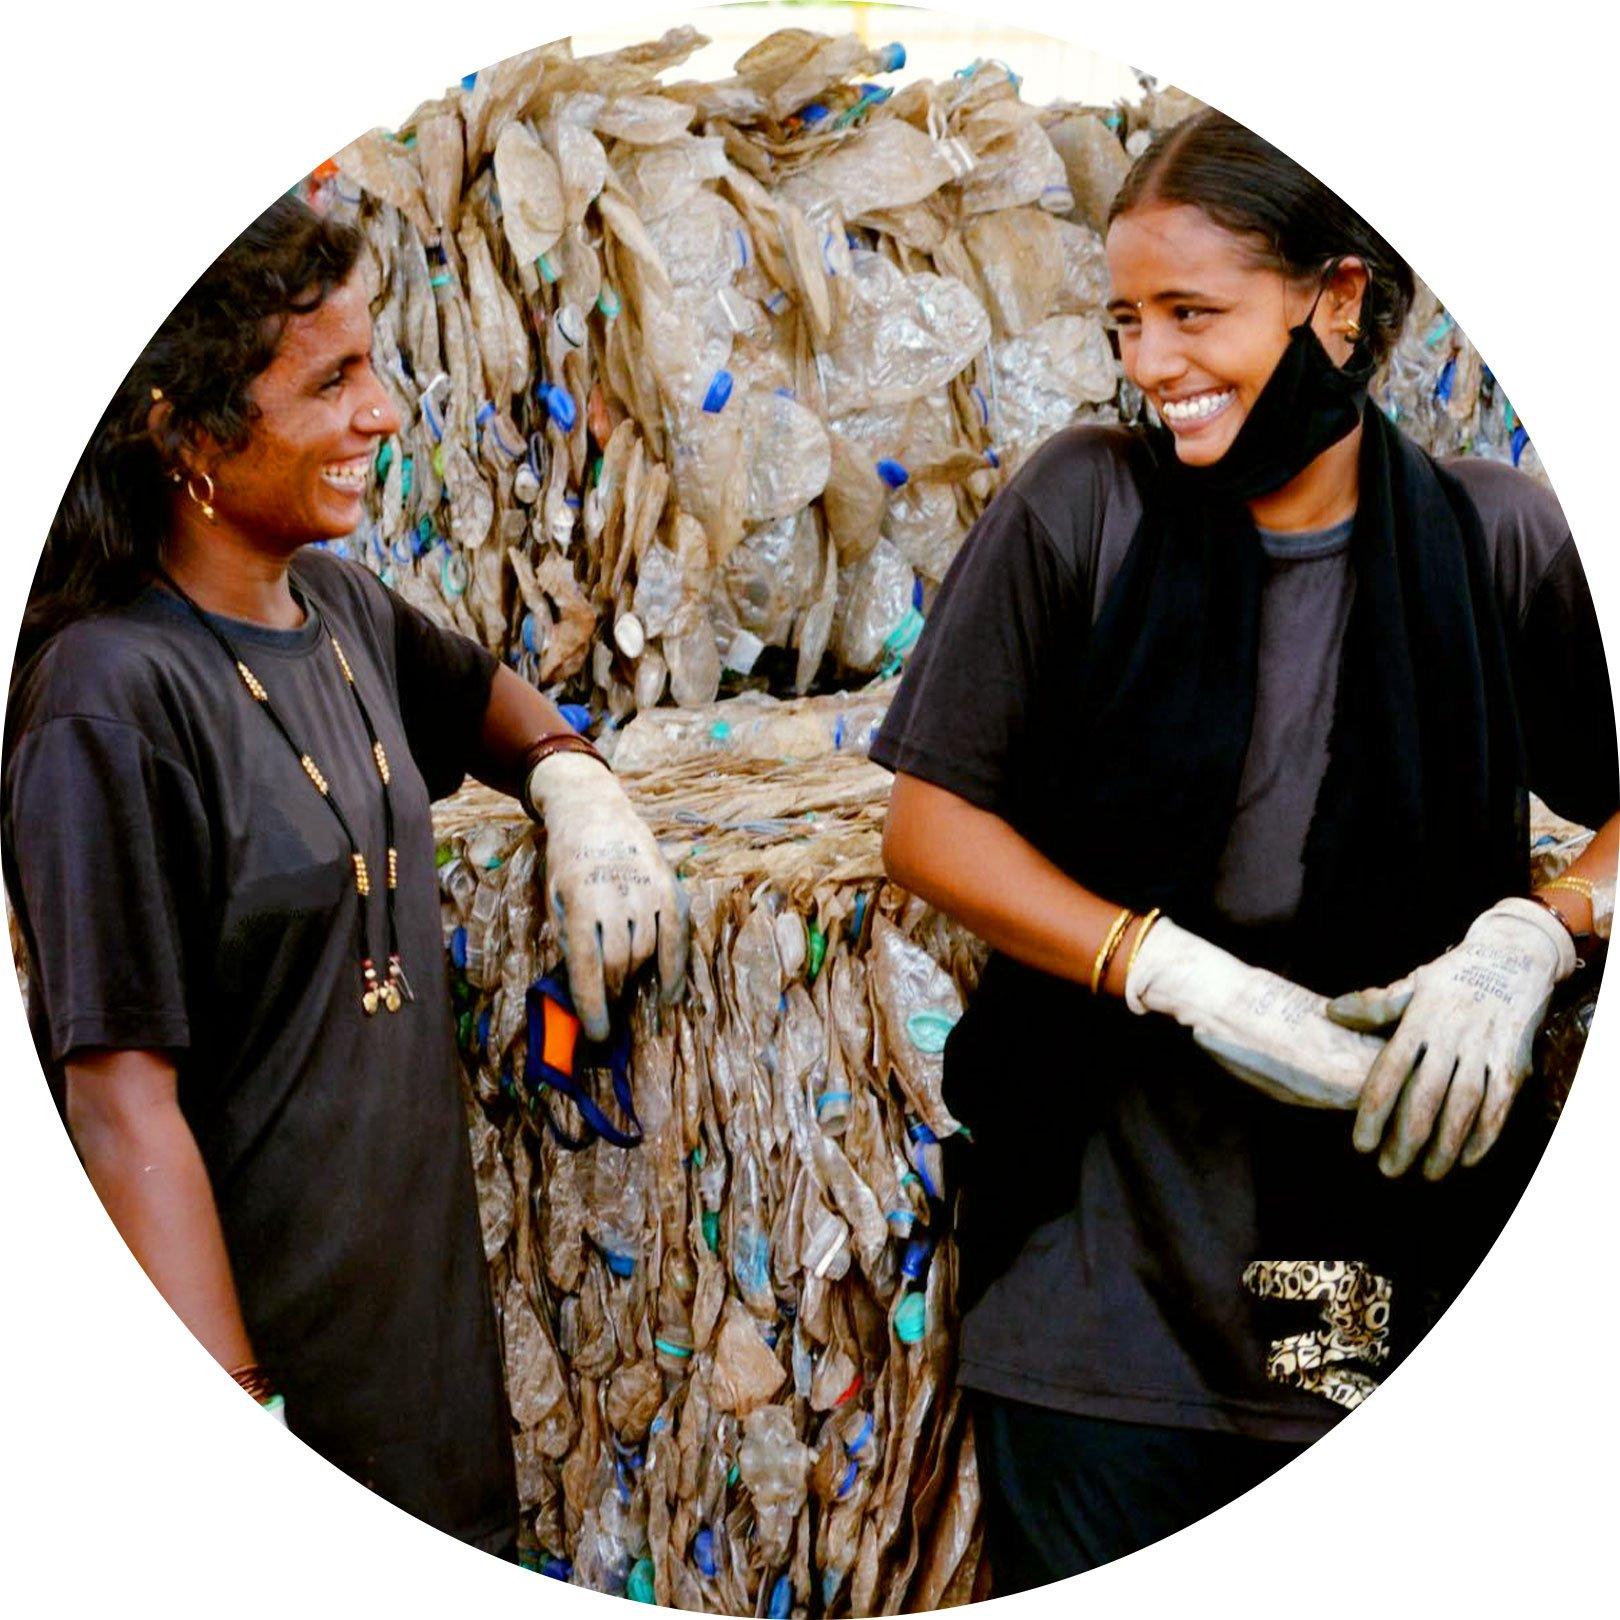 essence and Plastics For Change are working together for more recycling